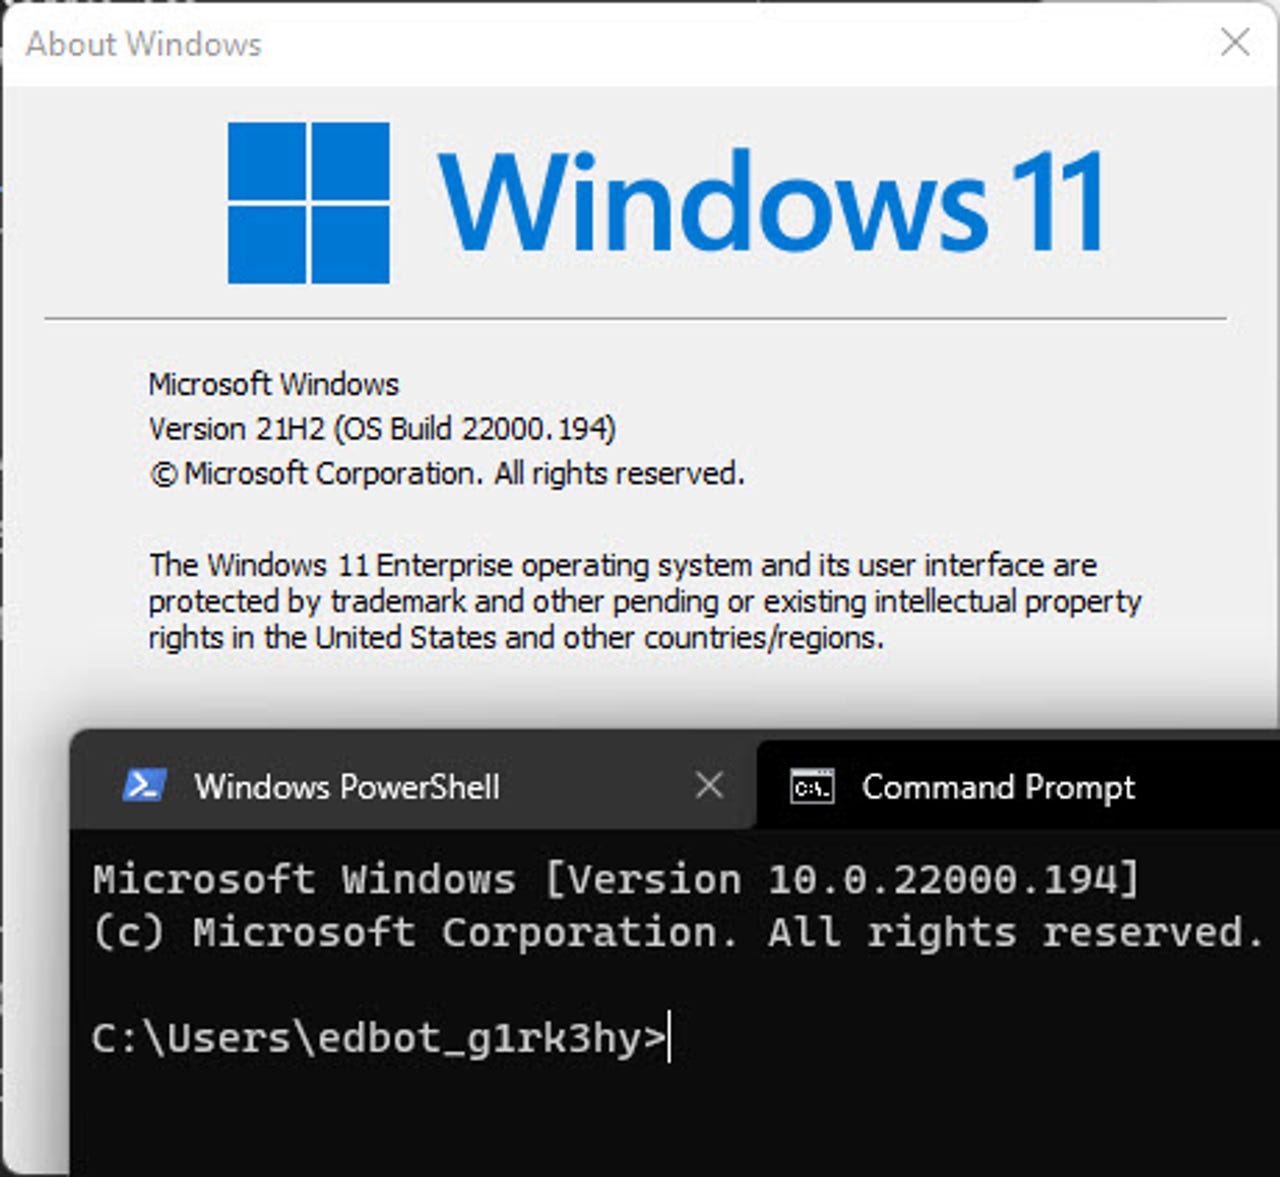 imagine if Microsoft saw this Windows 10 operating system on